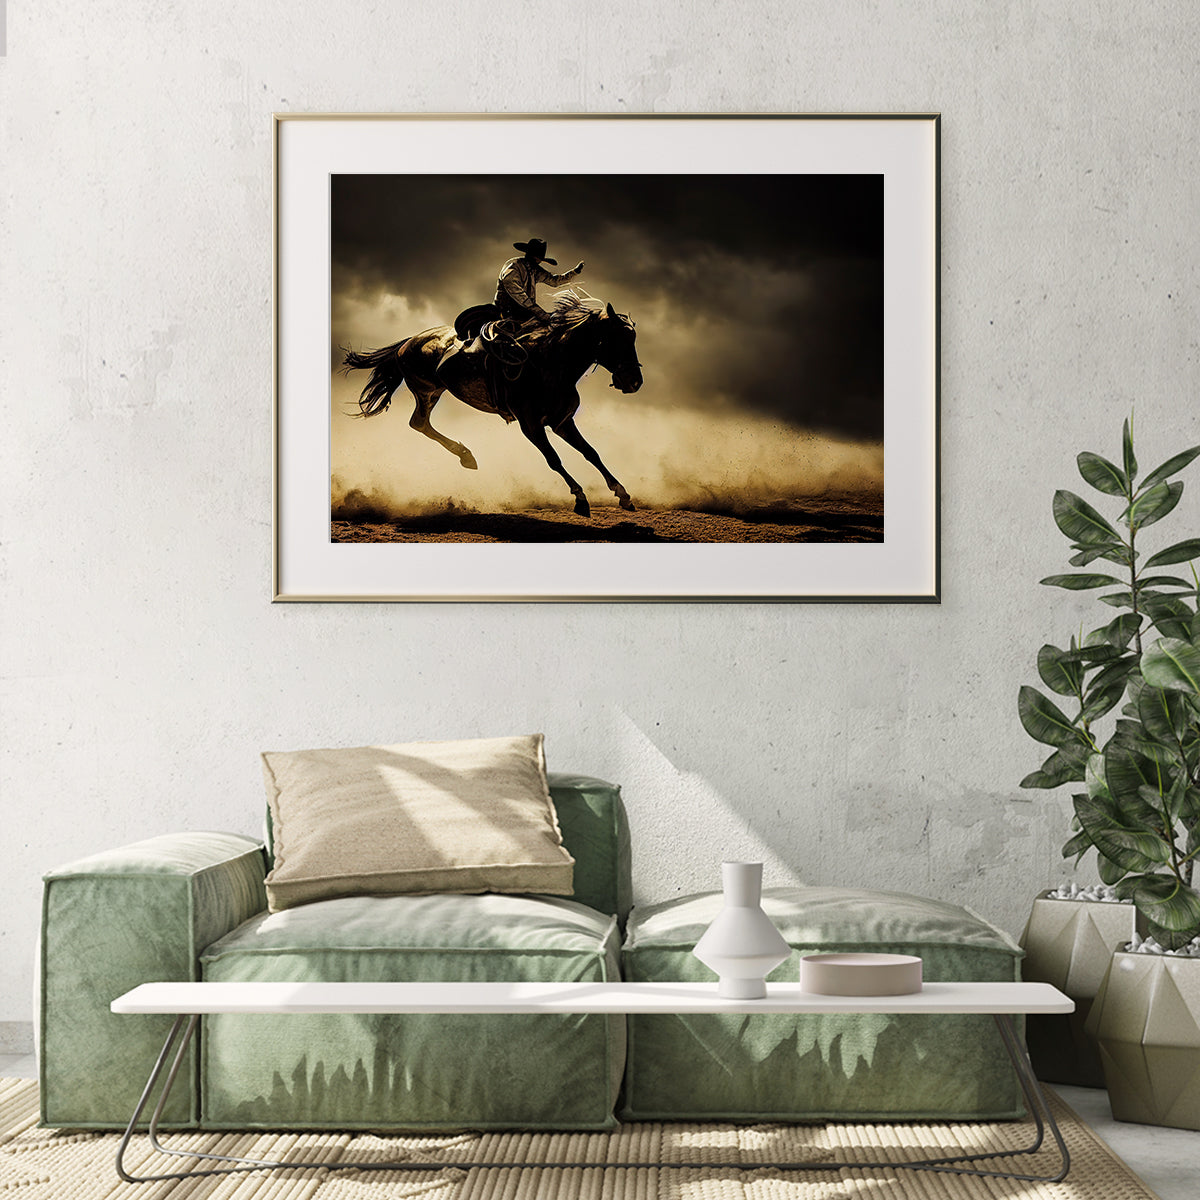 Cowboy Riding Horse Posters And Wall Art Prints For Living Room-Horizontal Posters NOT FRAMED-CetArt-10″x8″ inches-CetArt